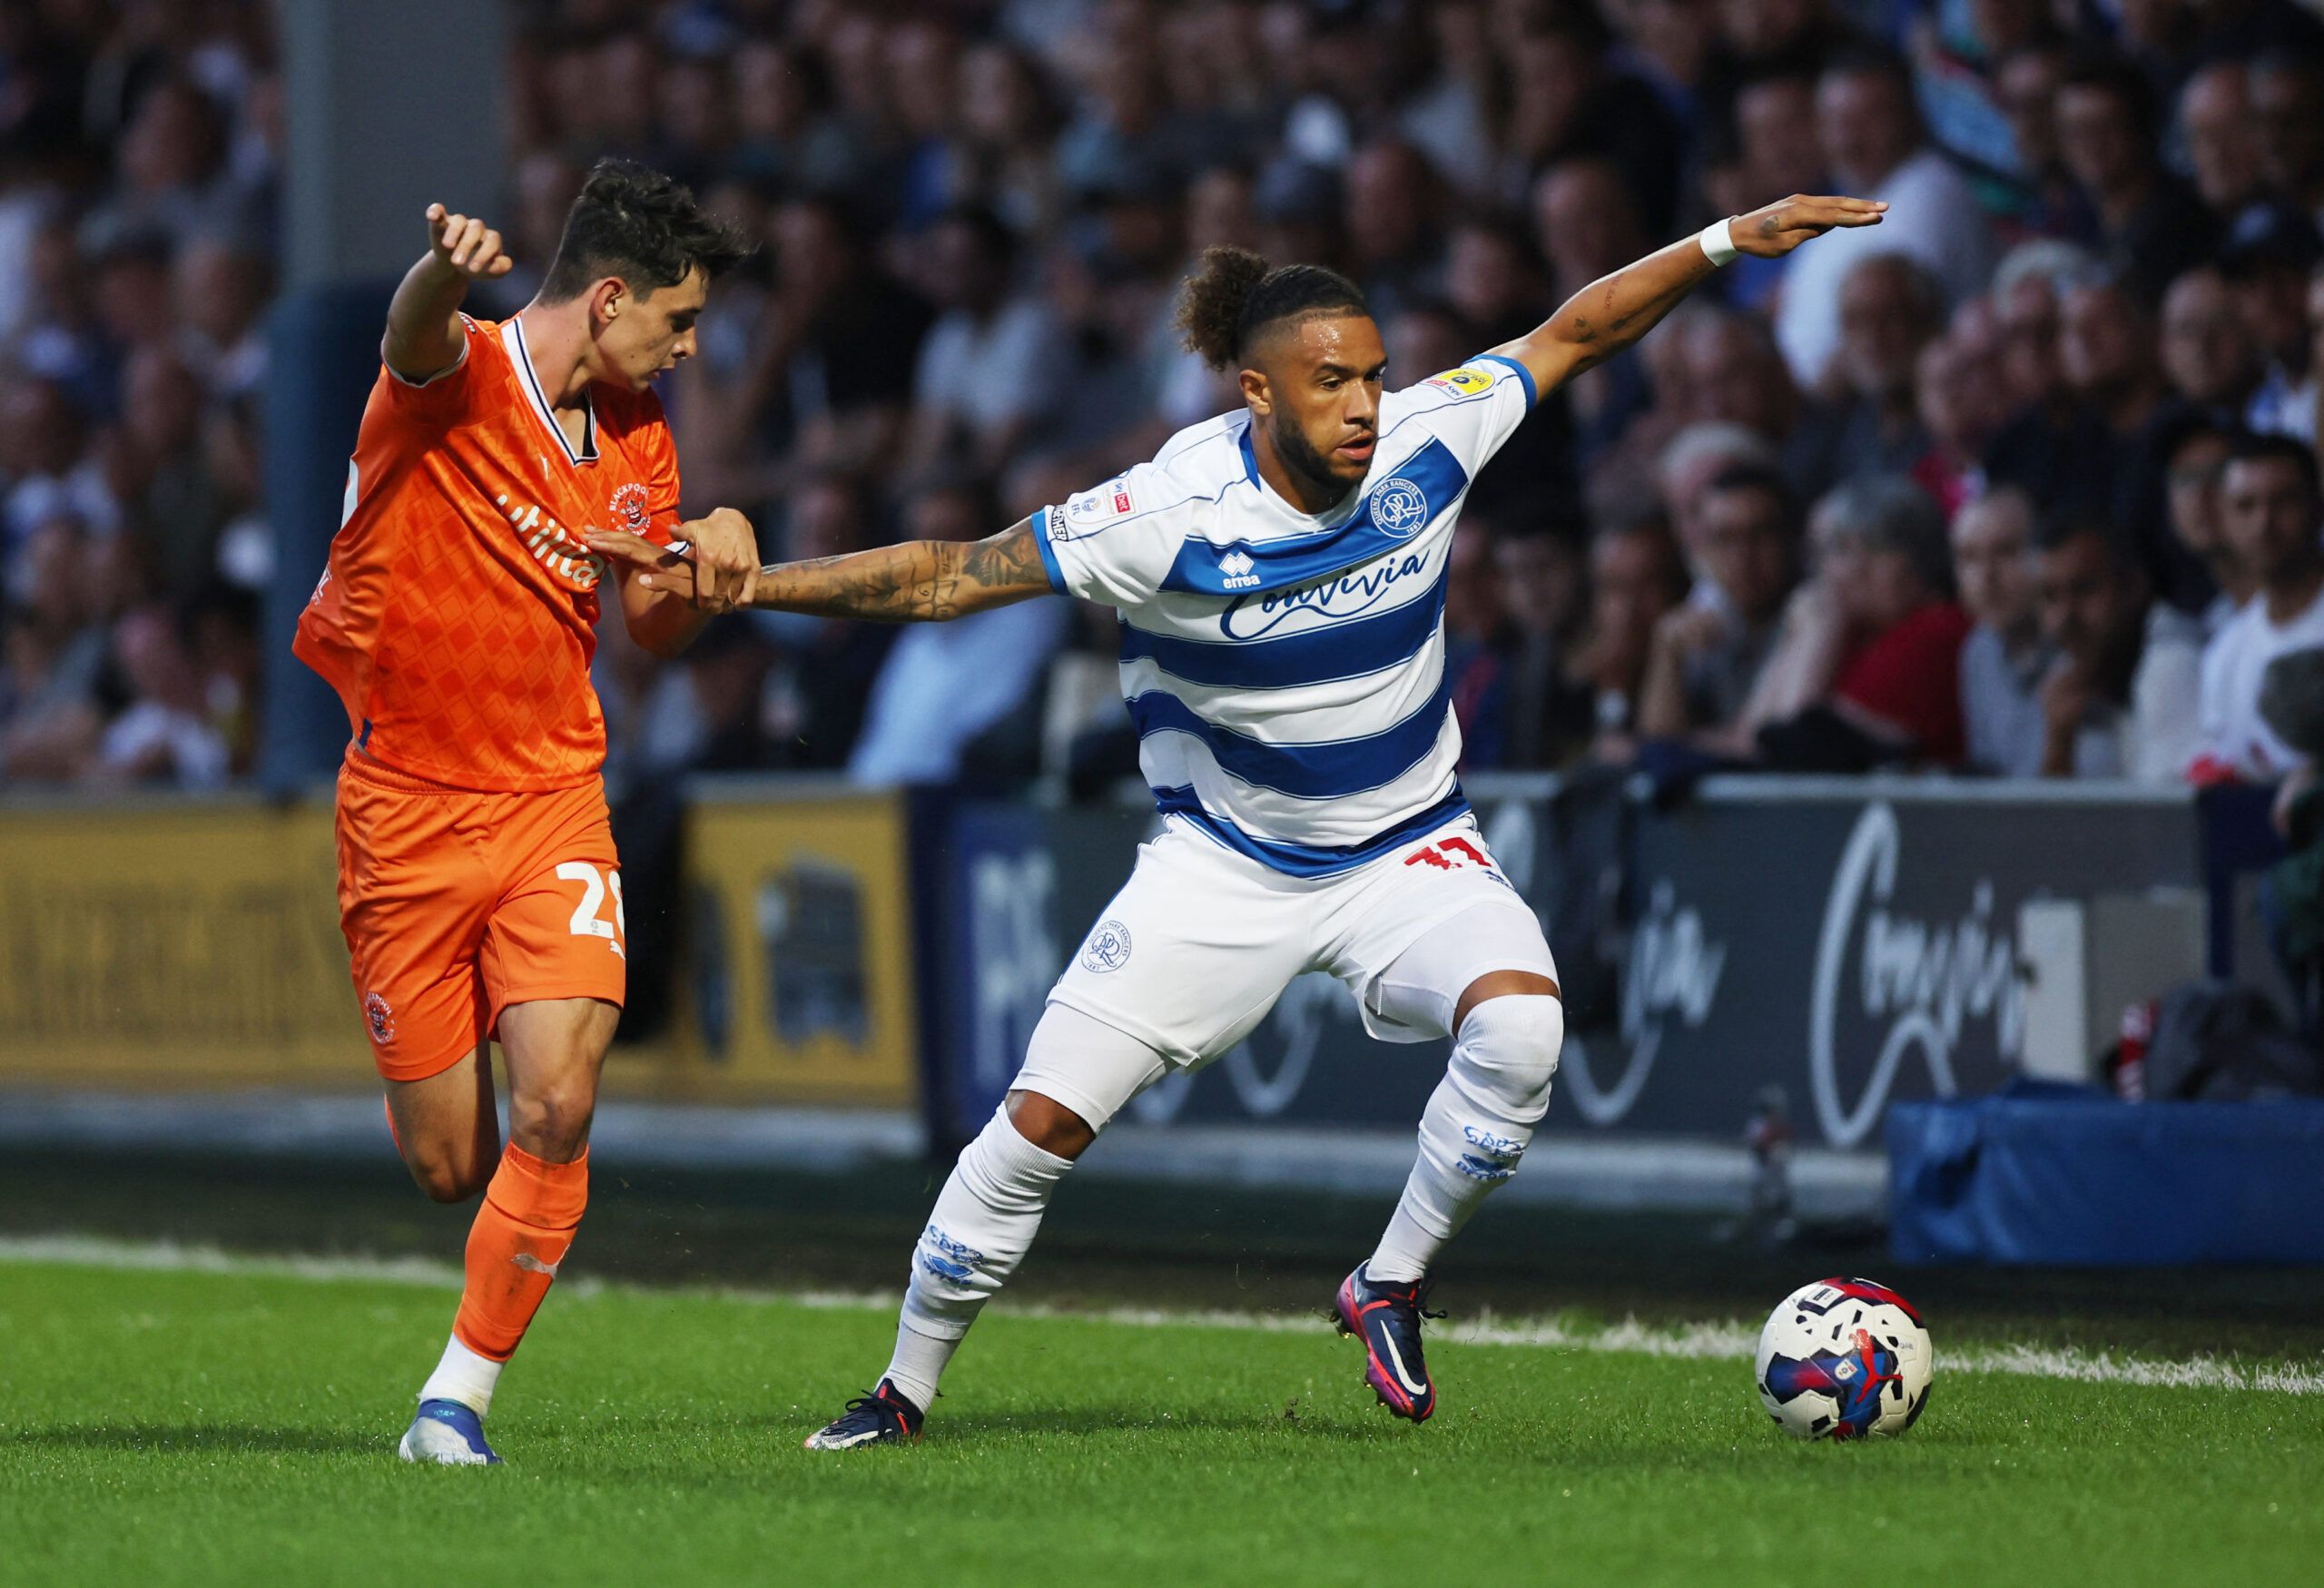 Soccer Football - Championship - Queens Park Rangers v Blackpool - Loftus Road, London, Britain - August 16, 2022 Queens Park Rangers' Tyler Roberts in action with Blackpool's Charlie Patino Action Images/Matthew Childs EDITORIAL USE ONLY. No use with unauthorized audio, video, data, fixture lists, club/league logos or 'live' services. Online in-match use limited to 75 images, no video emulation. No use in betting, games or single club /league/player publications.  Please contact your account re